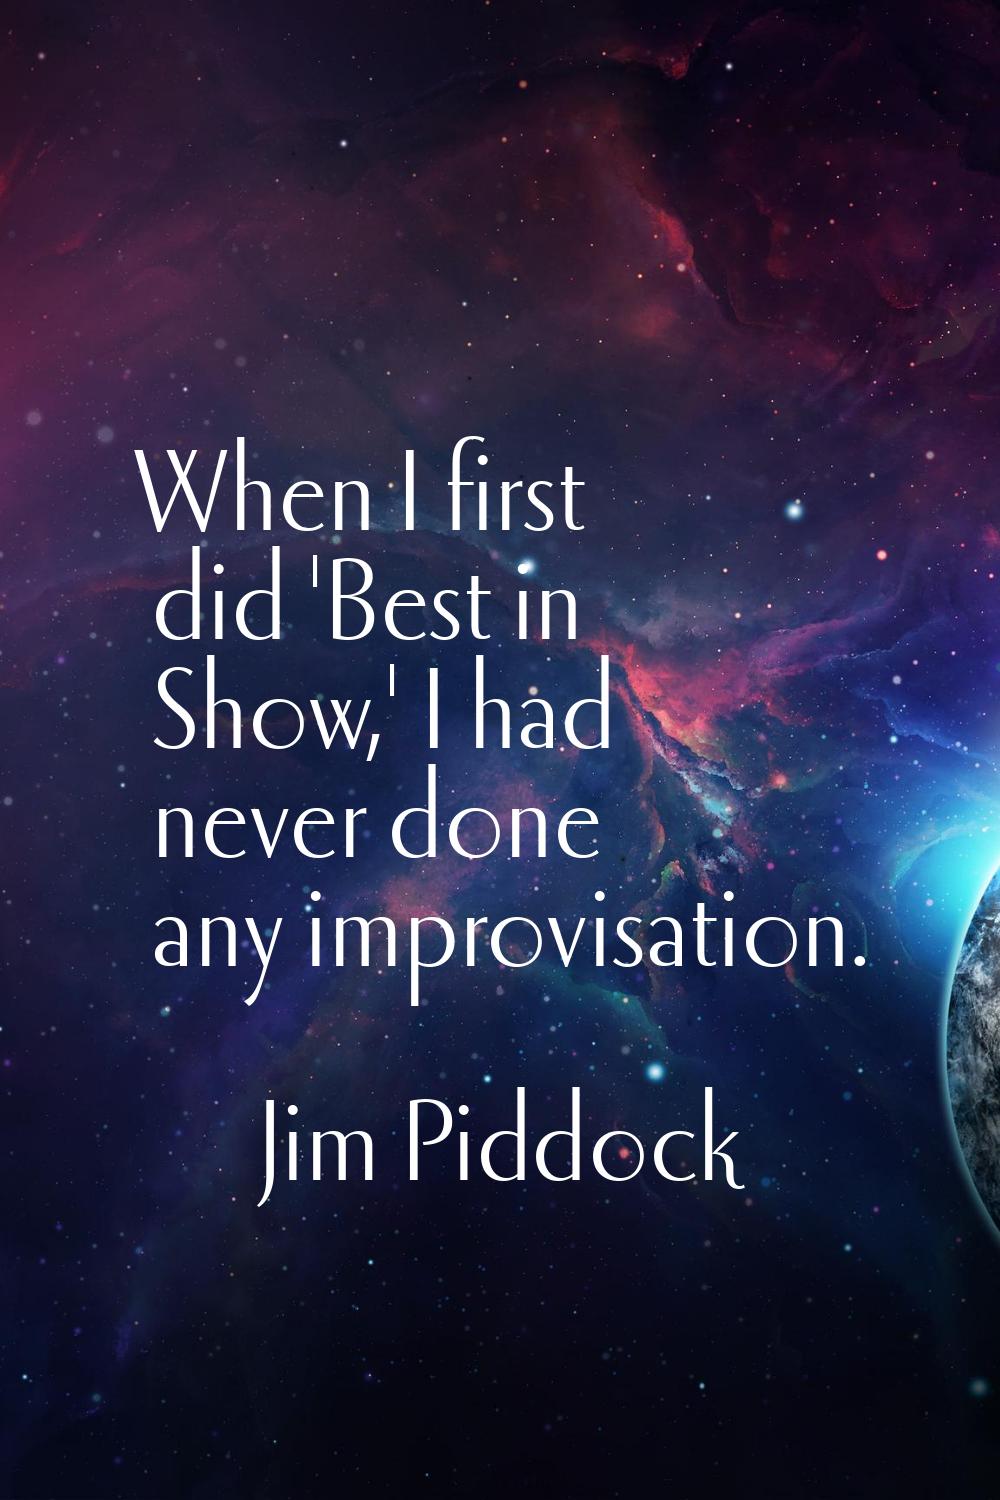 When I first did 'Best in Show,' I had never done any improvisation.